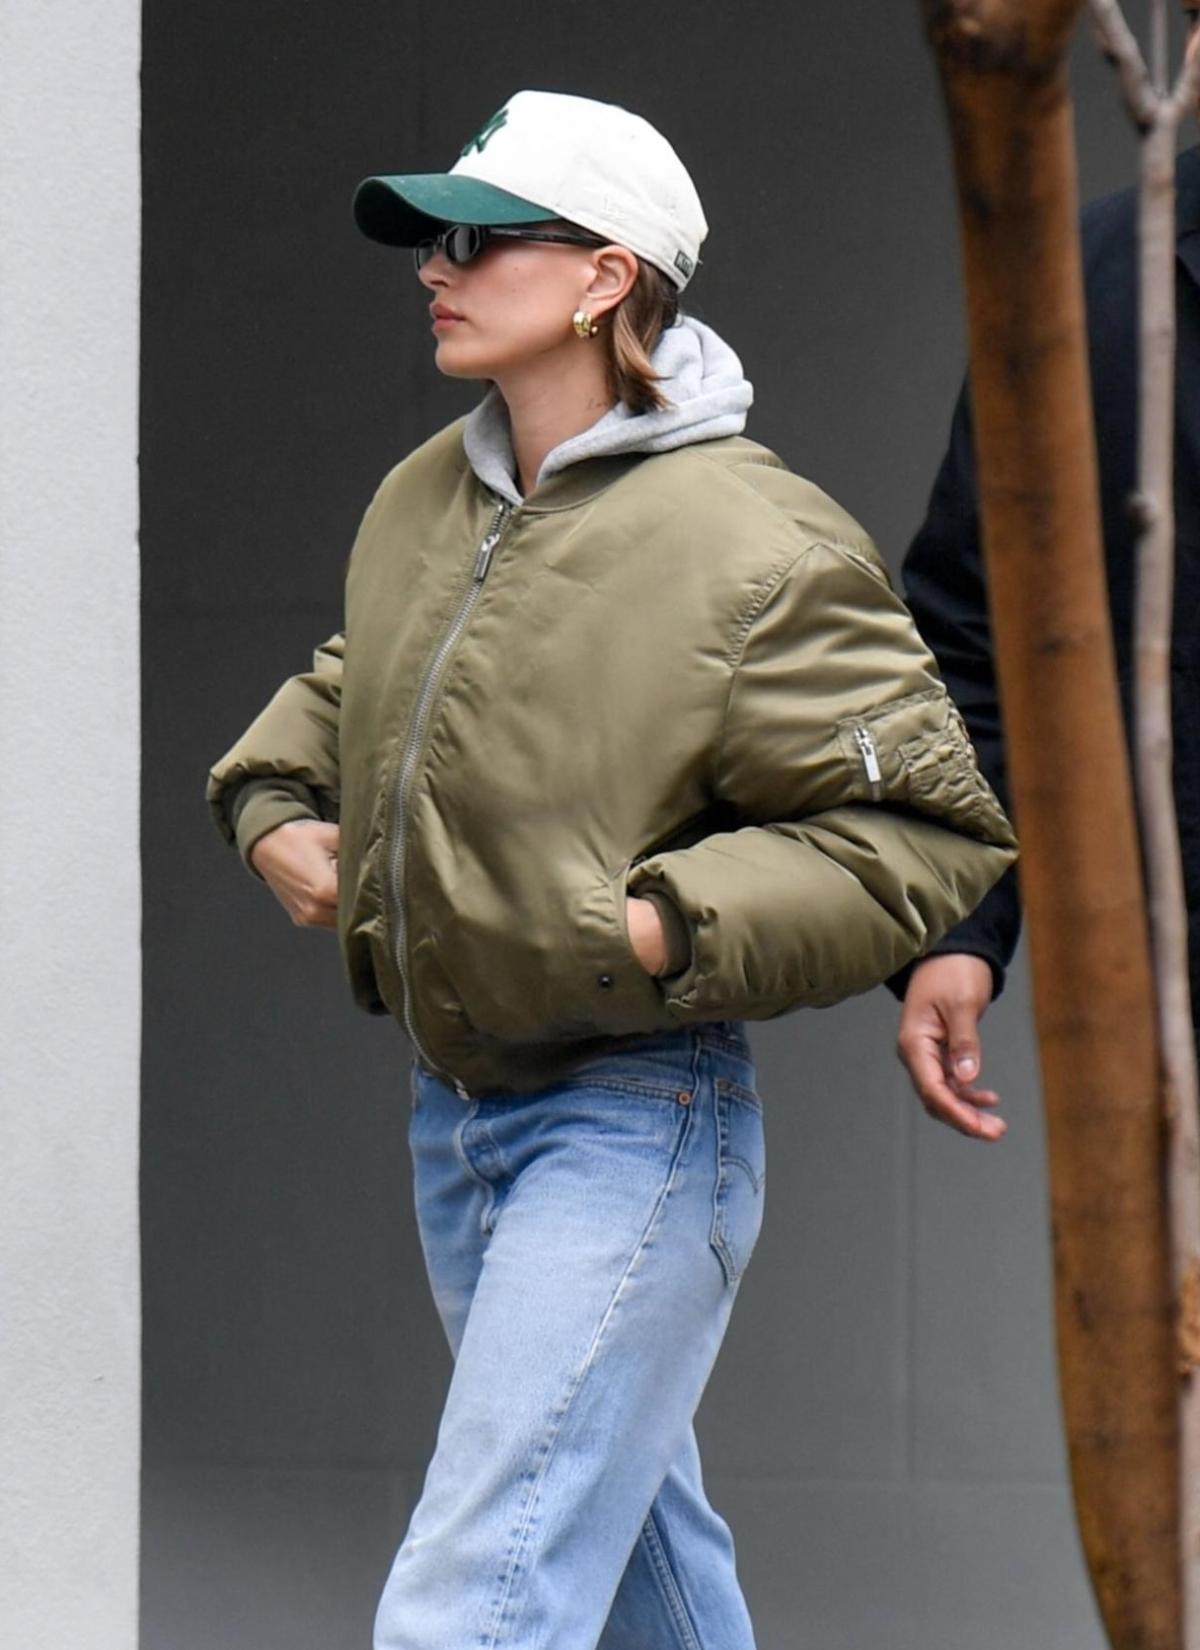 Celebrity Style VTMNTS Khaki & Beige Alpha Industries Edition Reversible Bomber Jacket, Saint Laurent Black SL 557 Shade Sunglasses, Levi's Blue Baggy 501 '90s Jeans, Hoodie and Cap Outfit in Beverly Hills, California